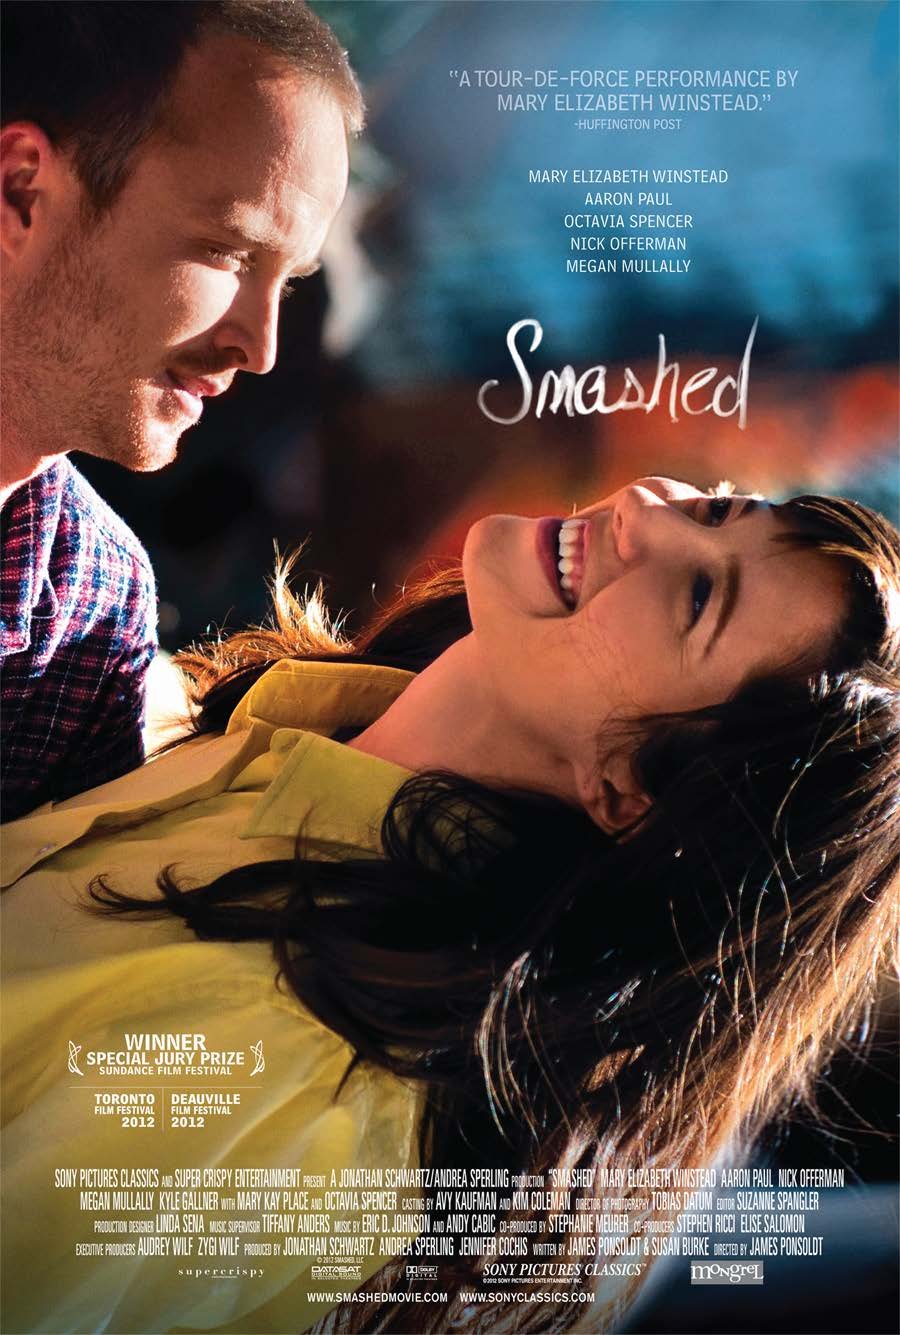 Poster of the movie Smashed